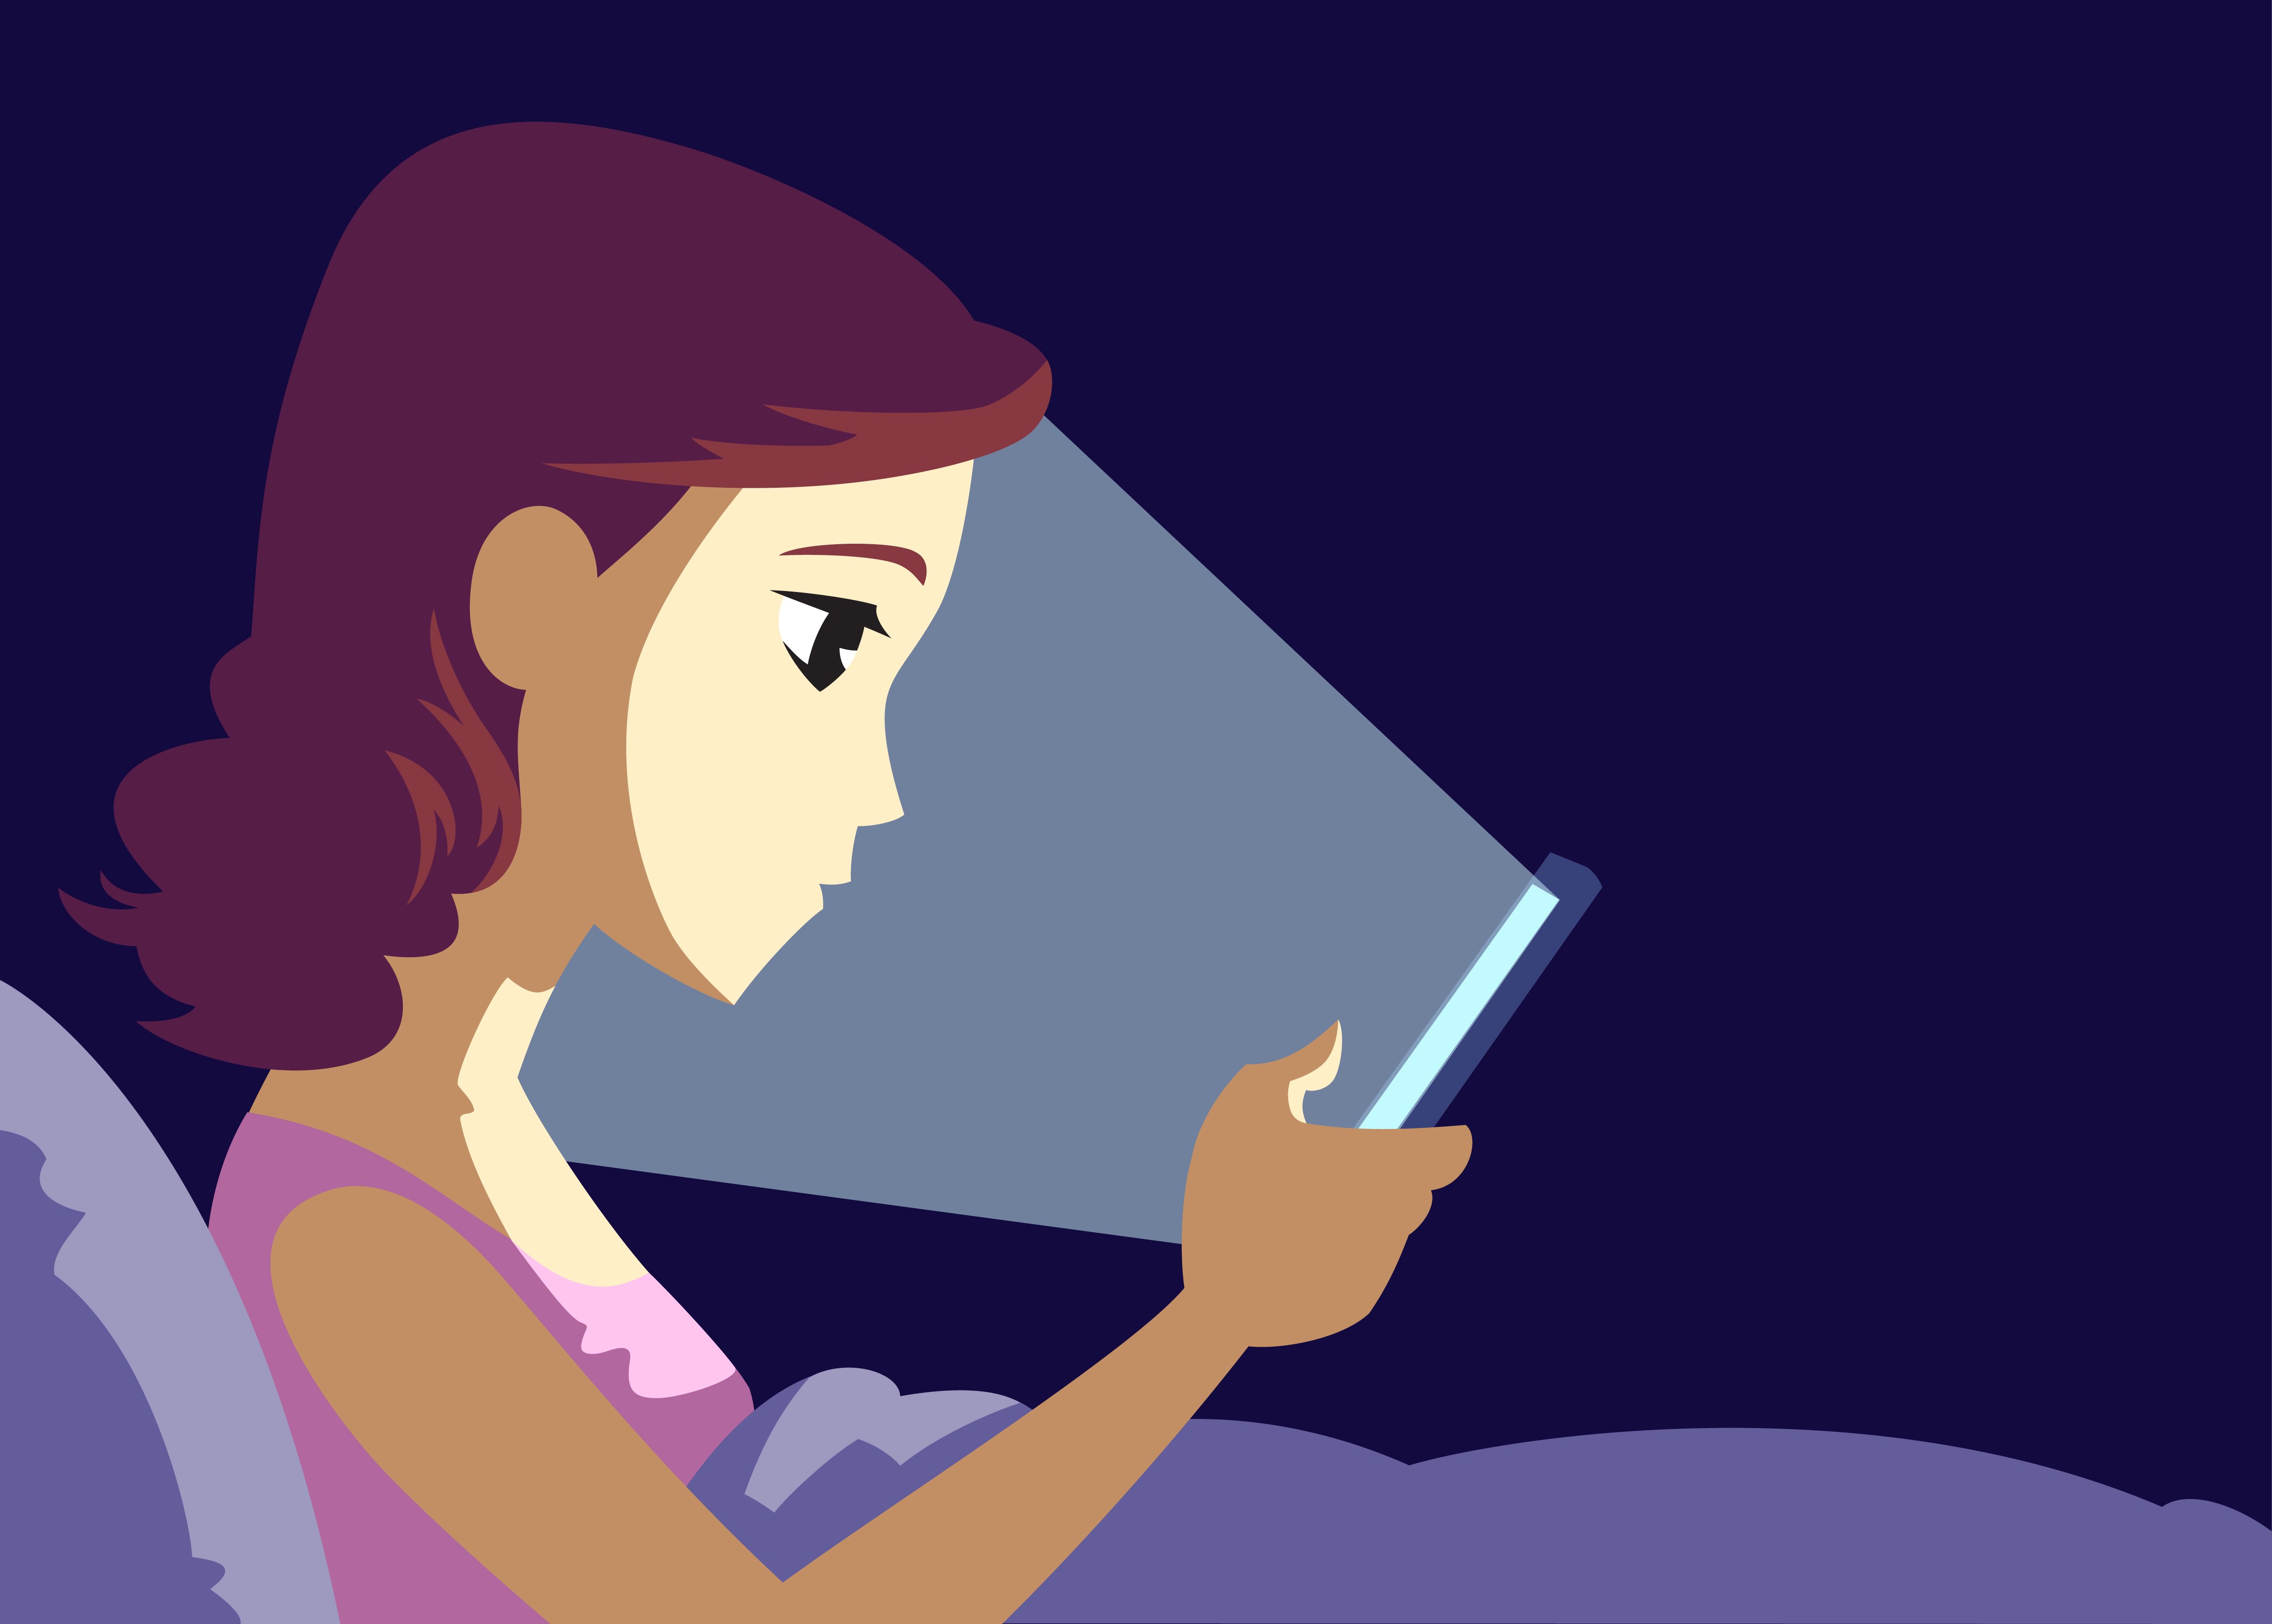 What's keeping your students up at night?